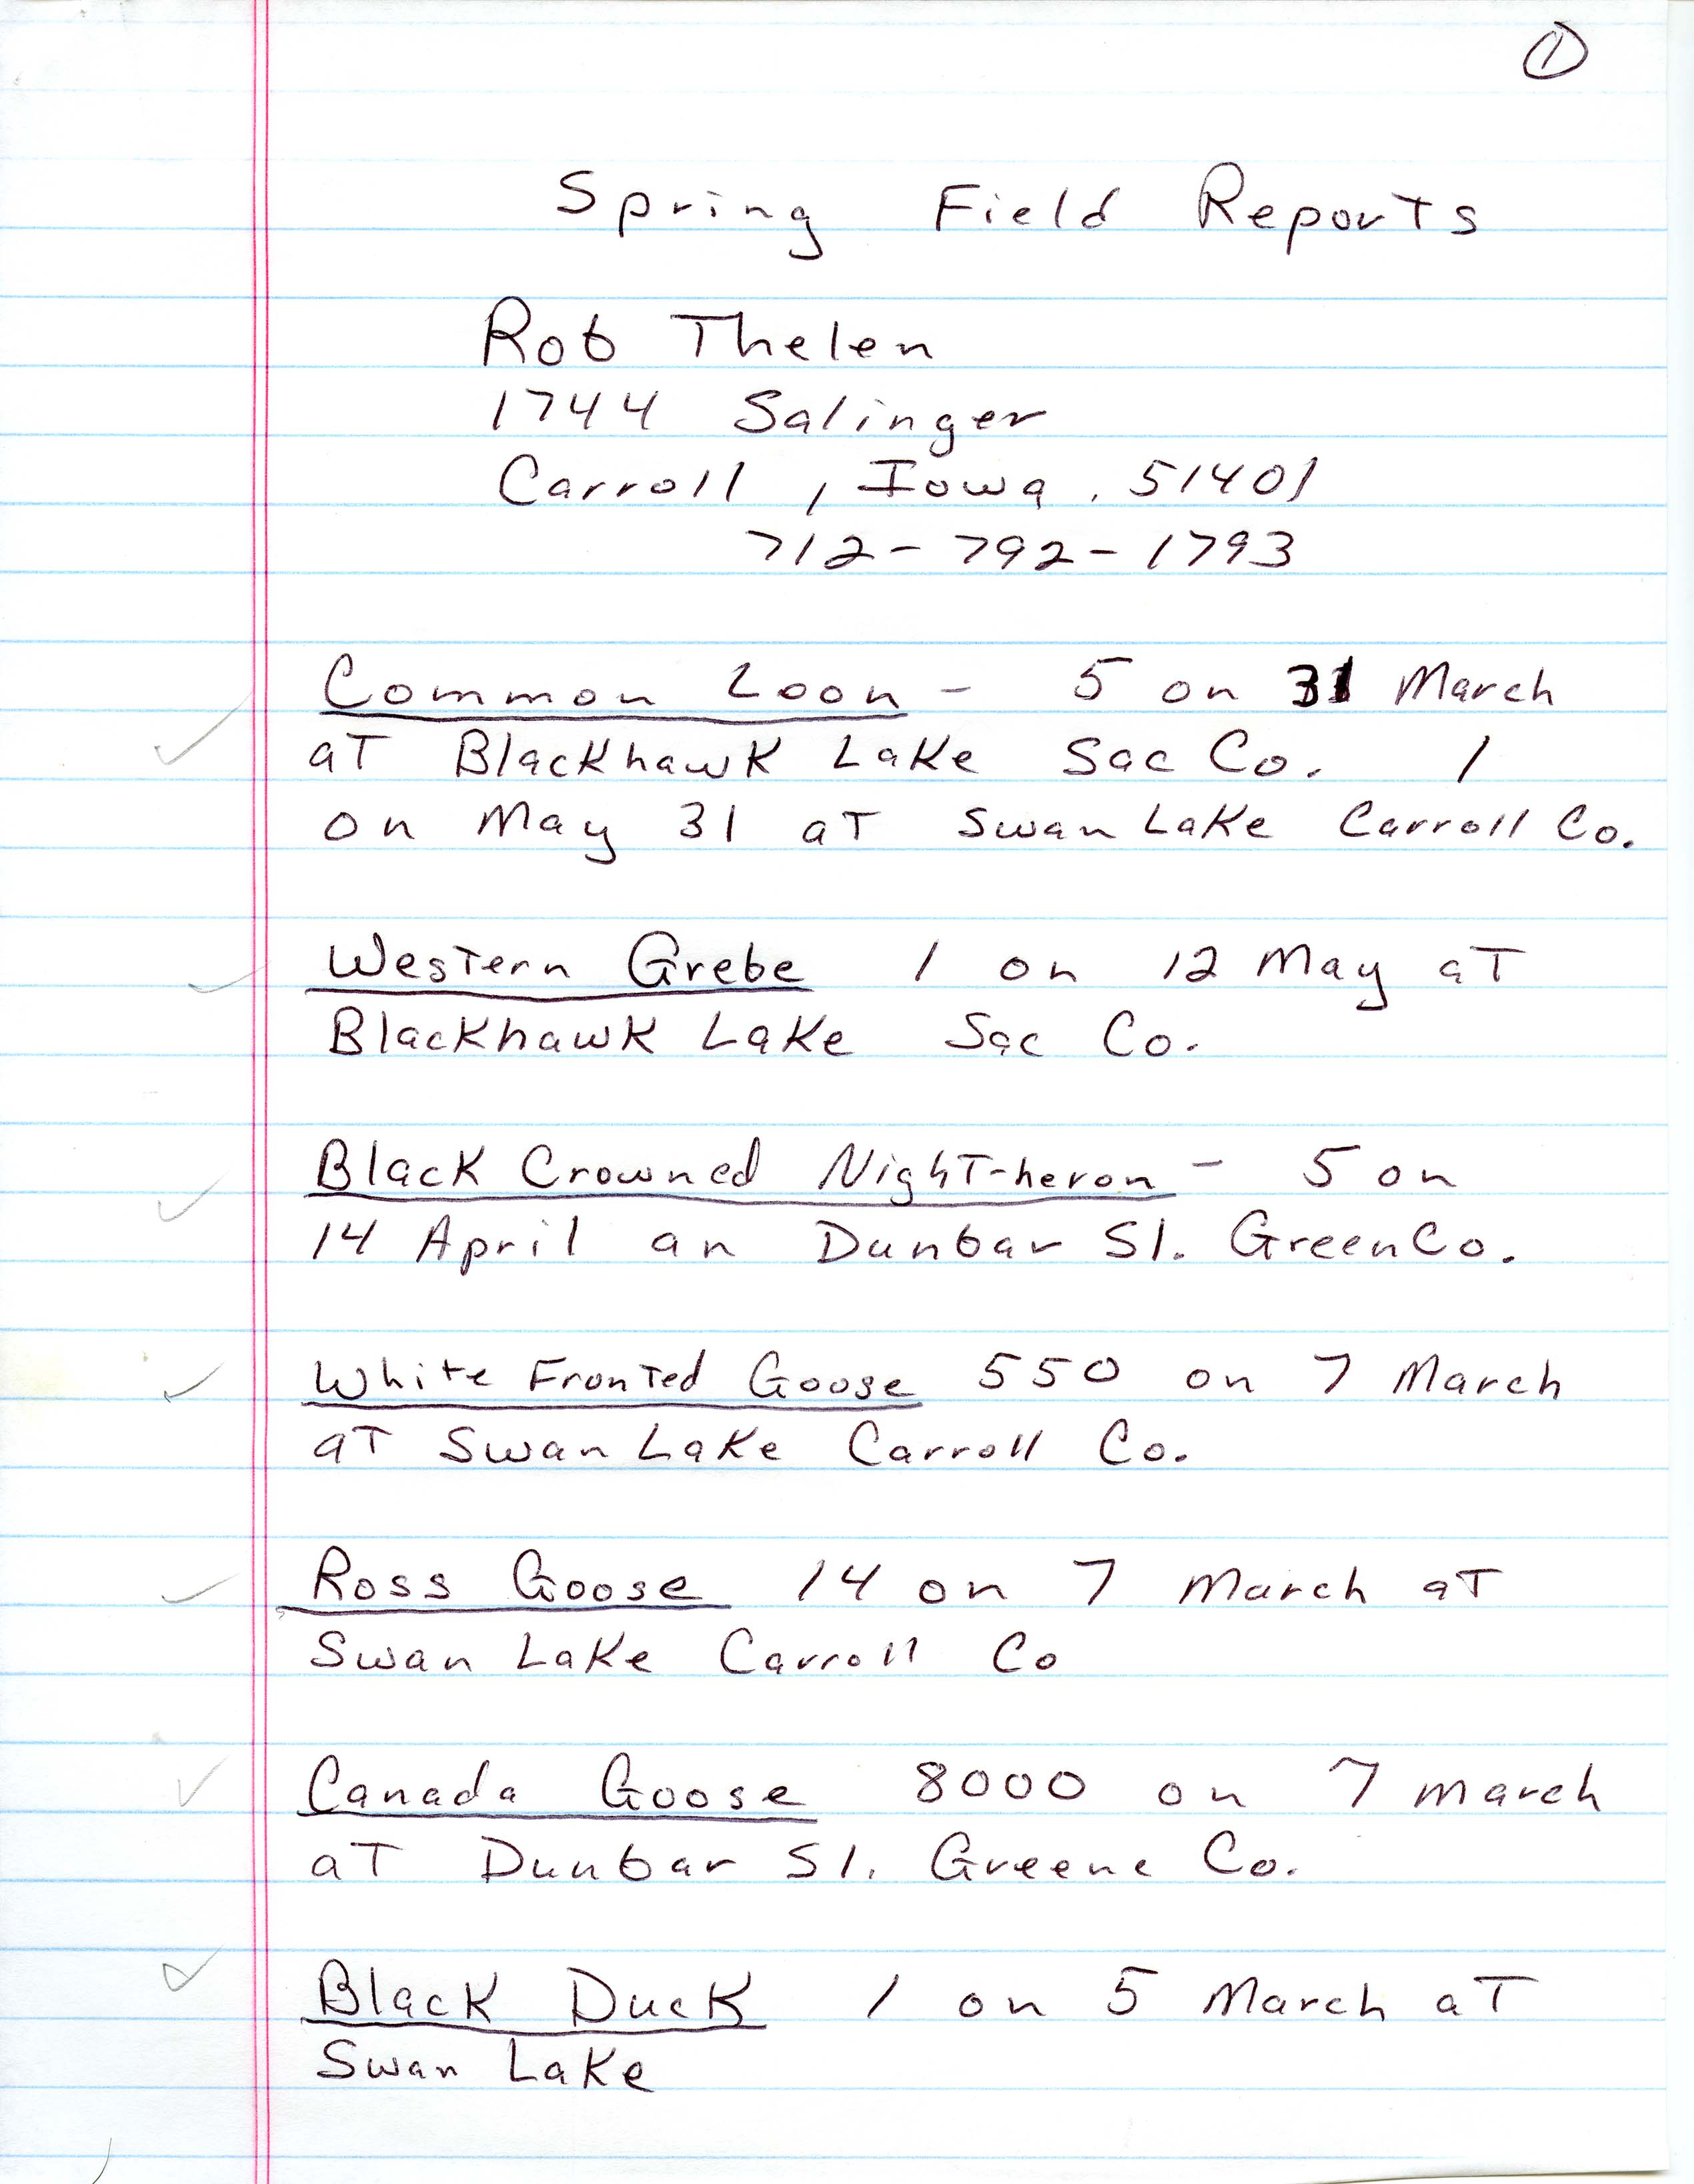 Field notes contributed by Rob Thelen, spring 1997